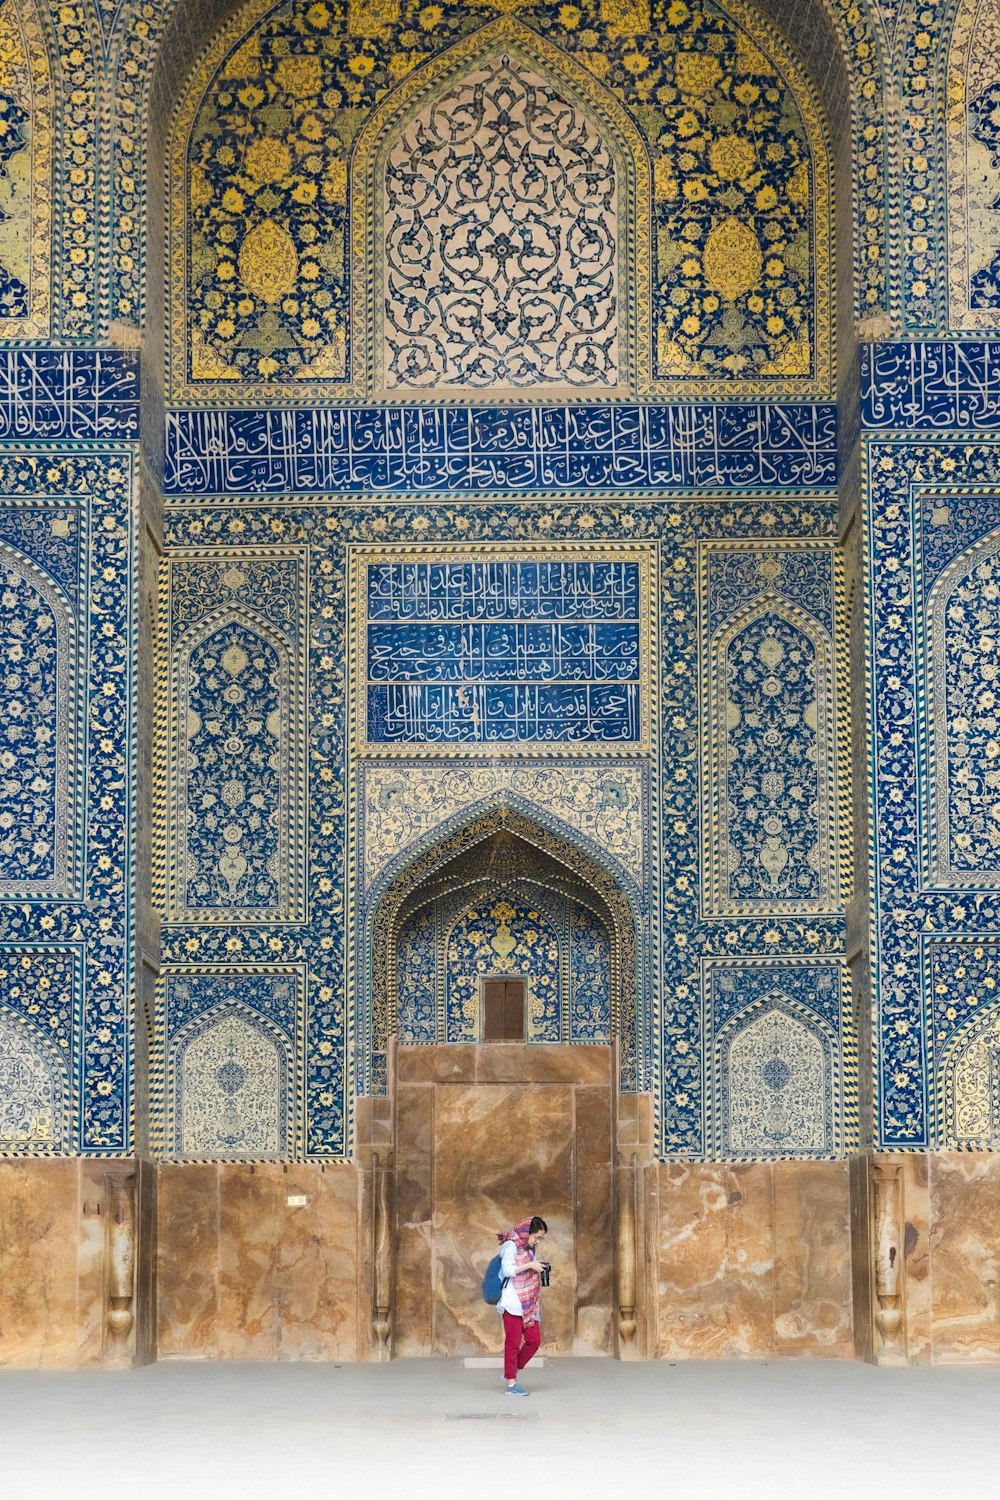 a person standing in front of a wall with intricate designs